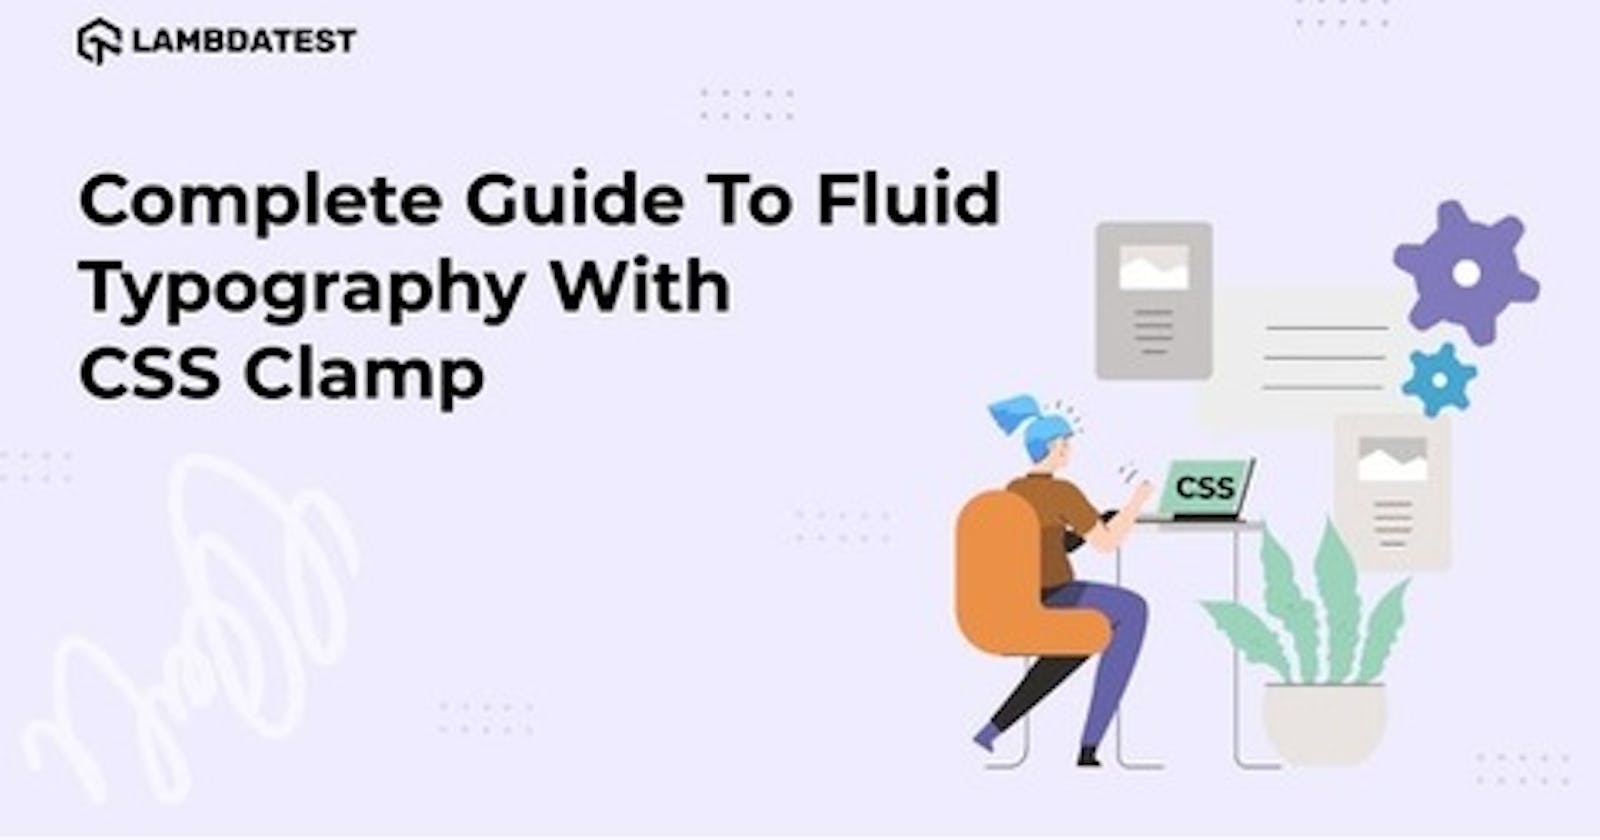 Complete Guide To Fluid Typography With CSS Clamp